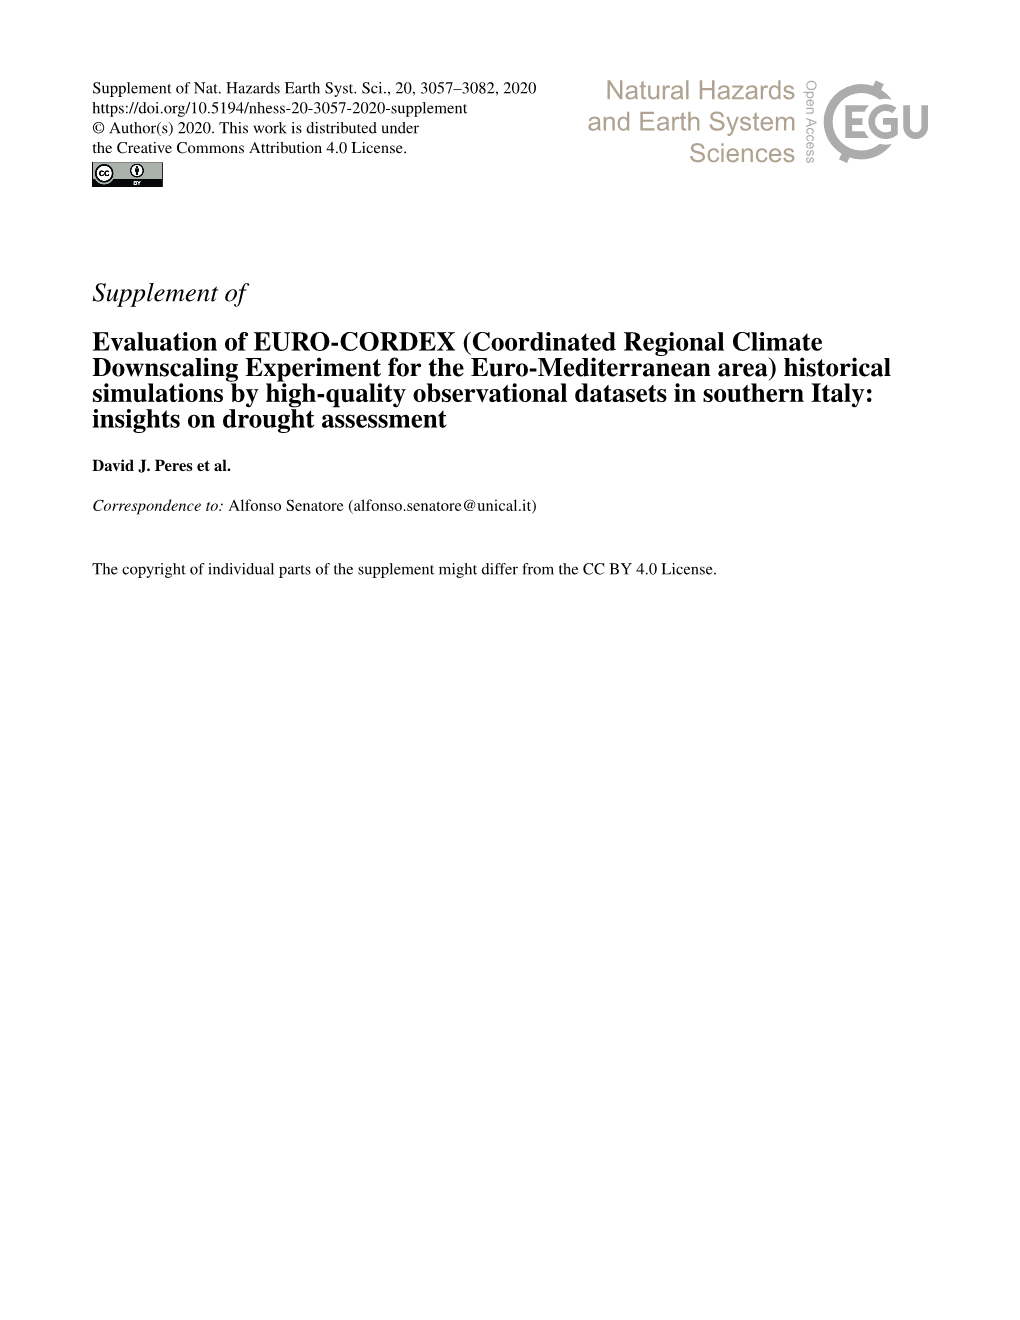 Supplement of Evaluation of EURO-CORDEX (Coordinated